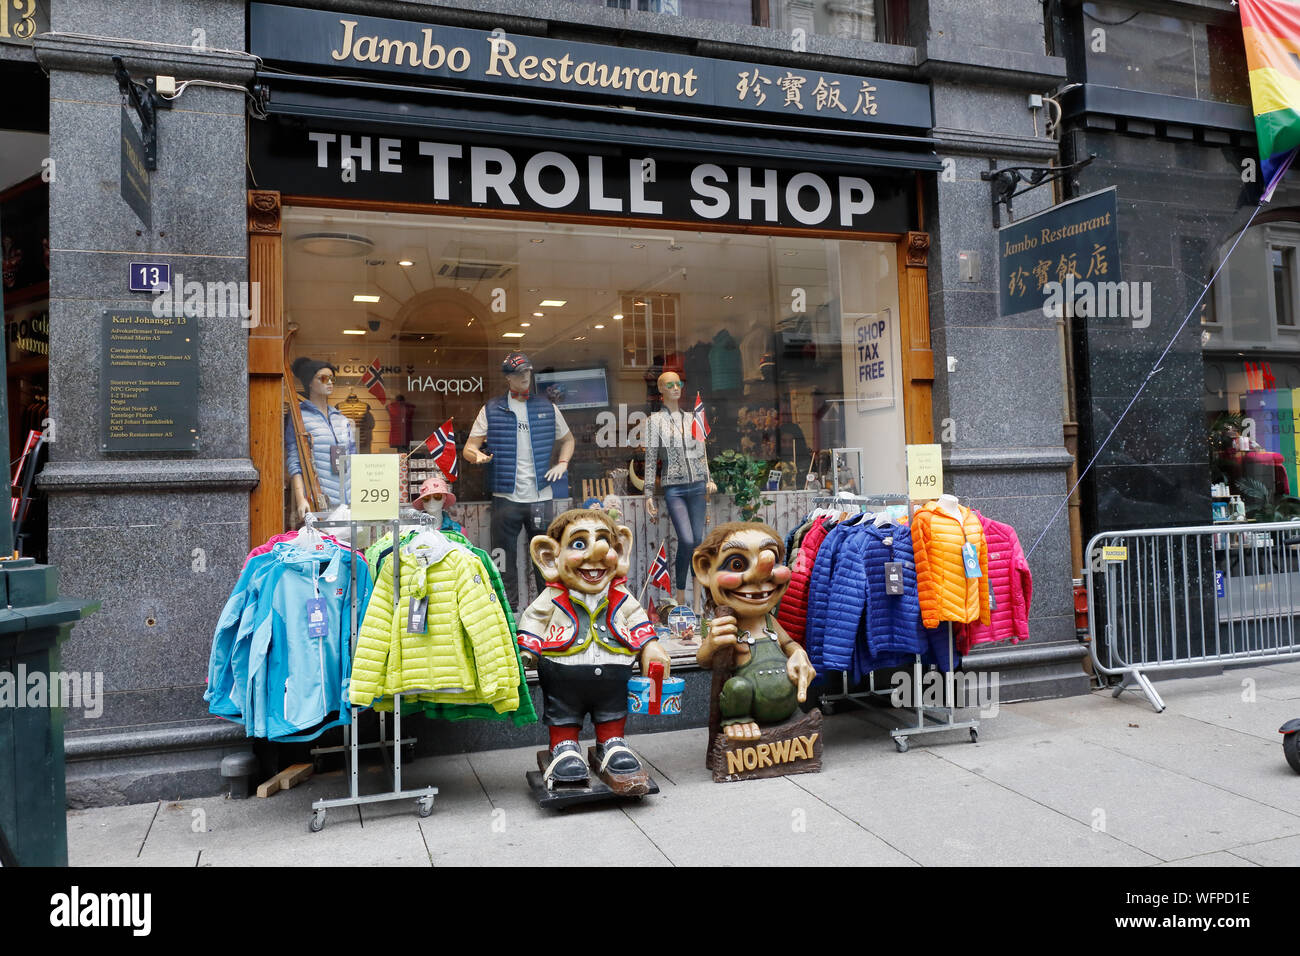 Oslo, Norway - June 20, 2019: The Troll shop located at the Karl Johan gate  street Stock Photo - Alamy